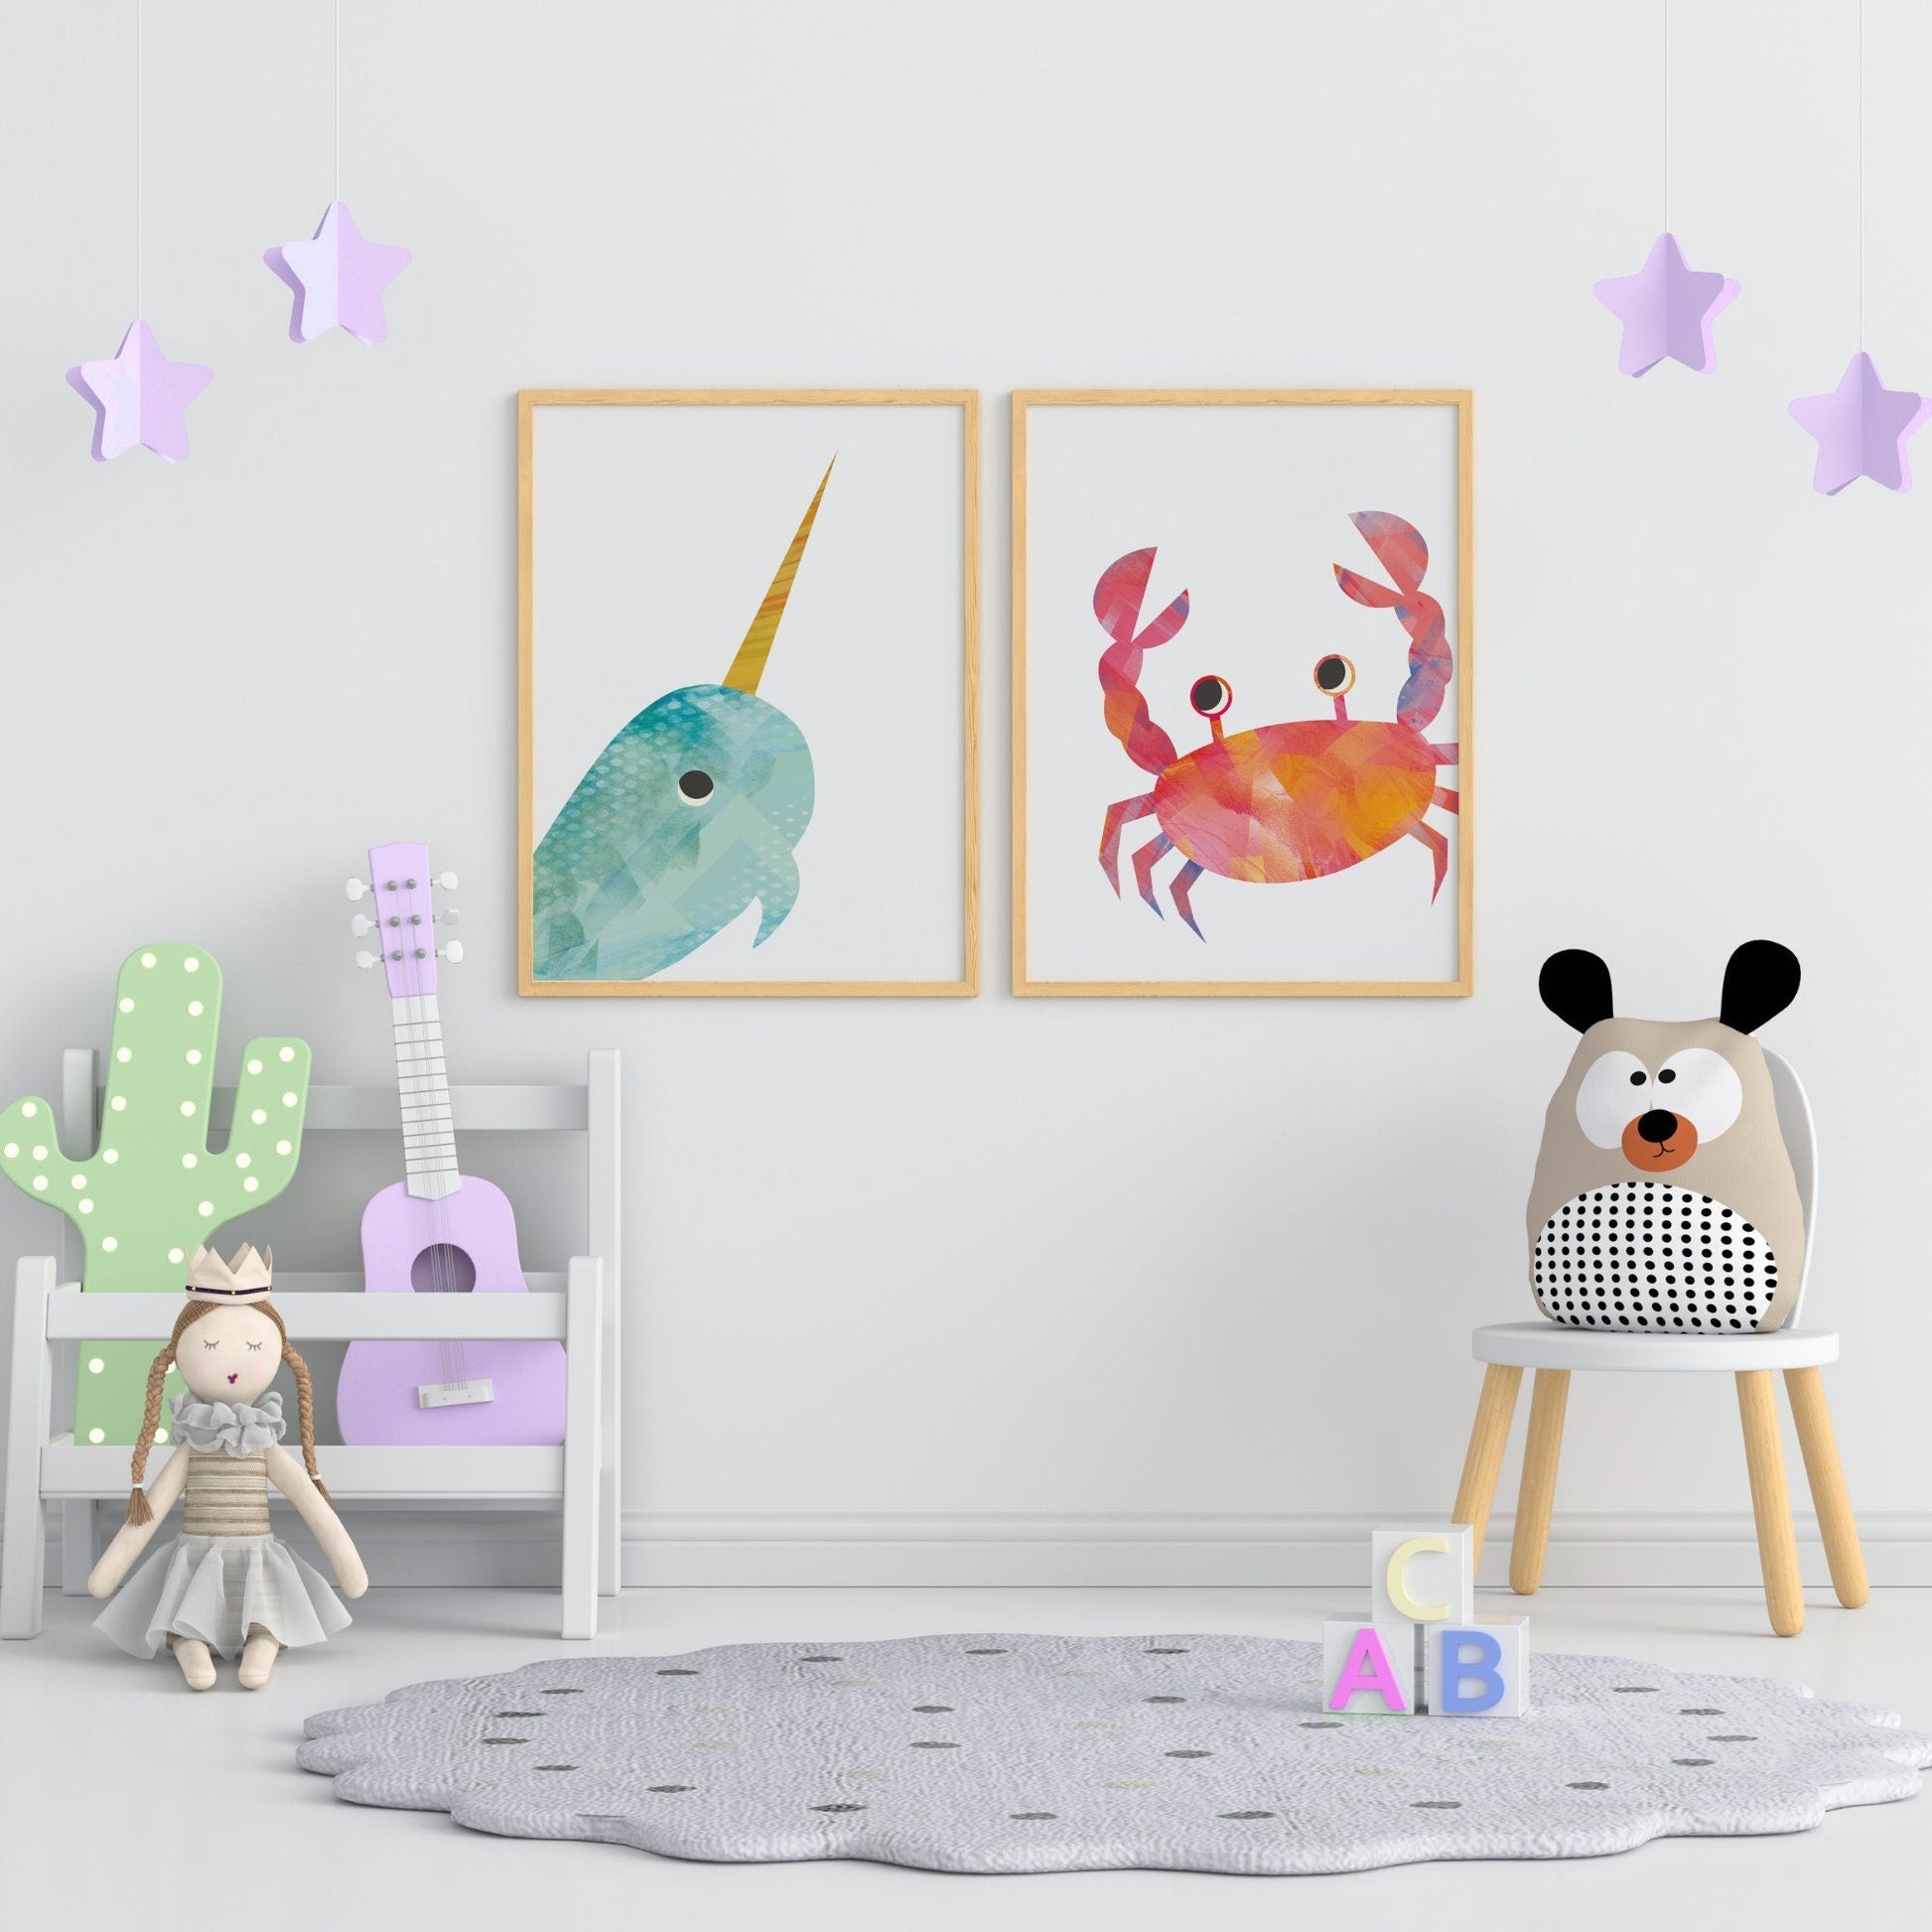 Ocean animal nursery prints - Dolly and Fred Designs